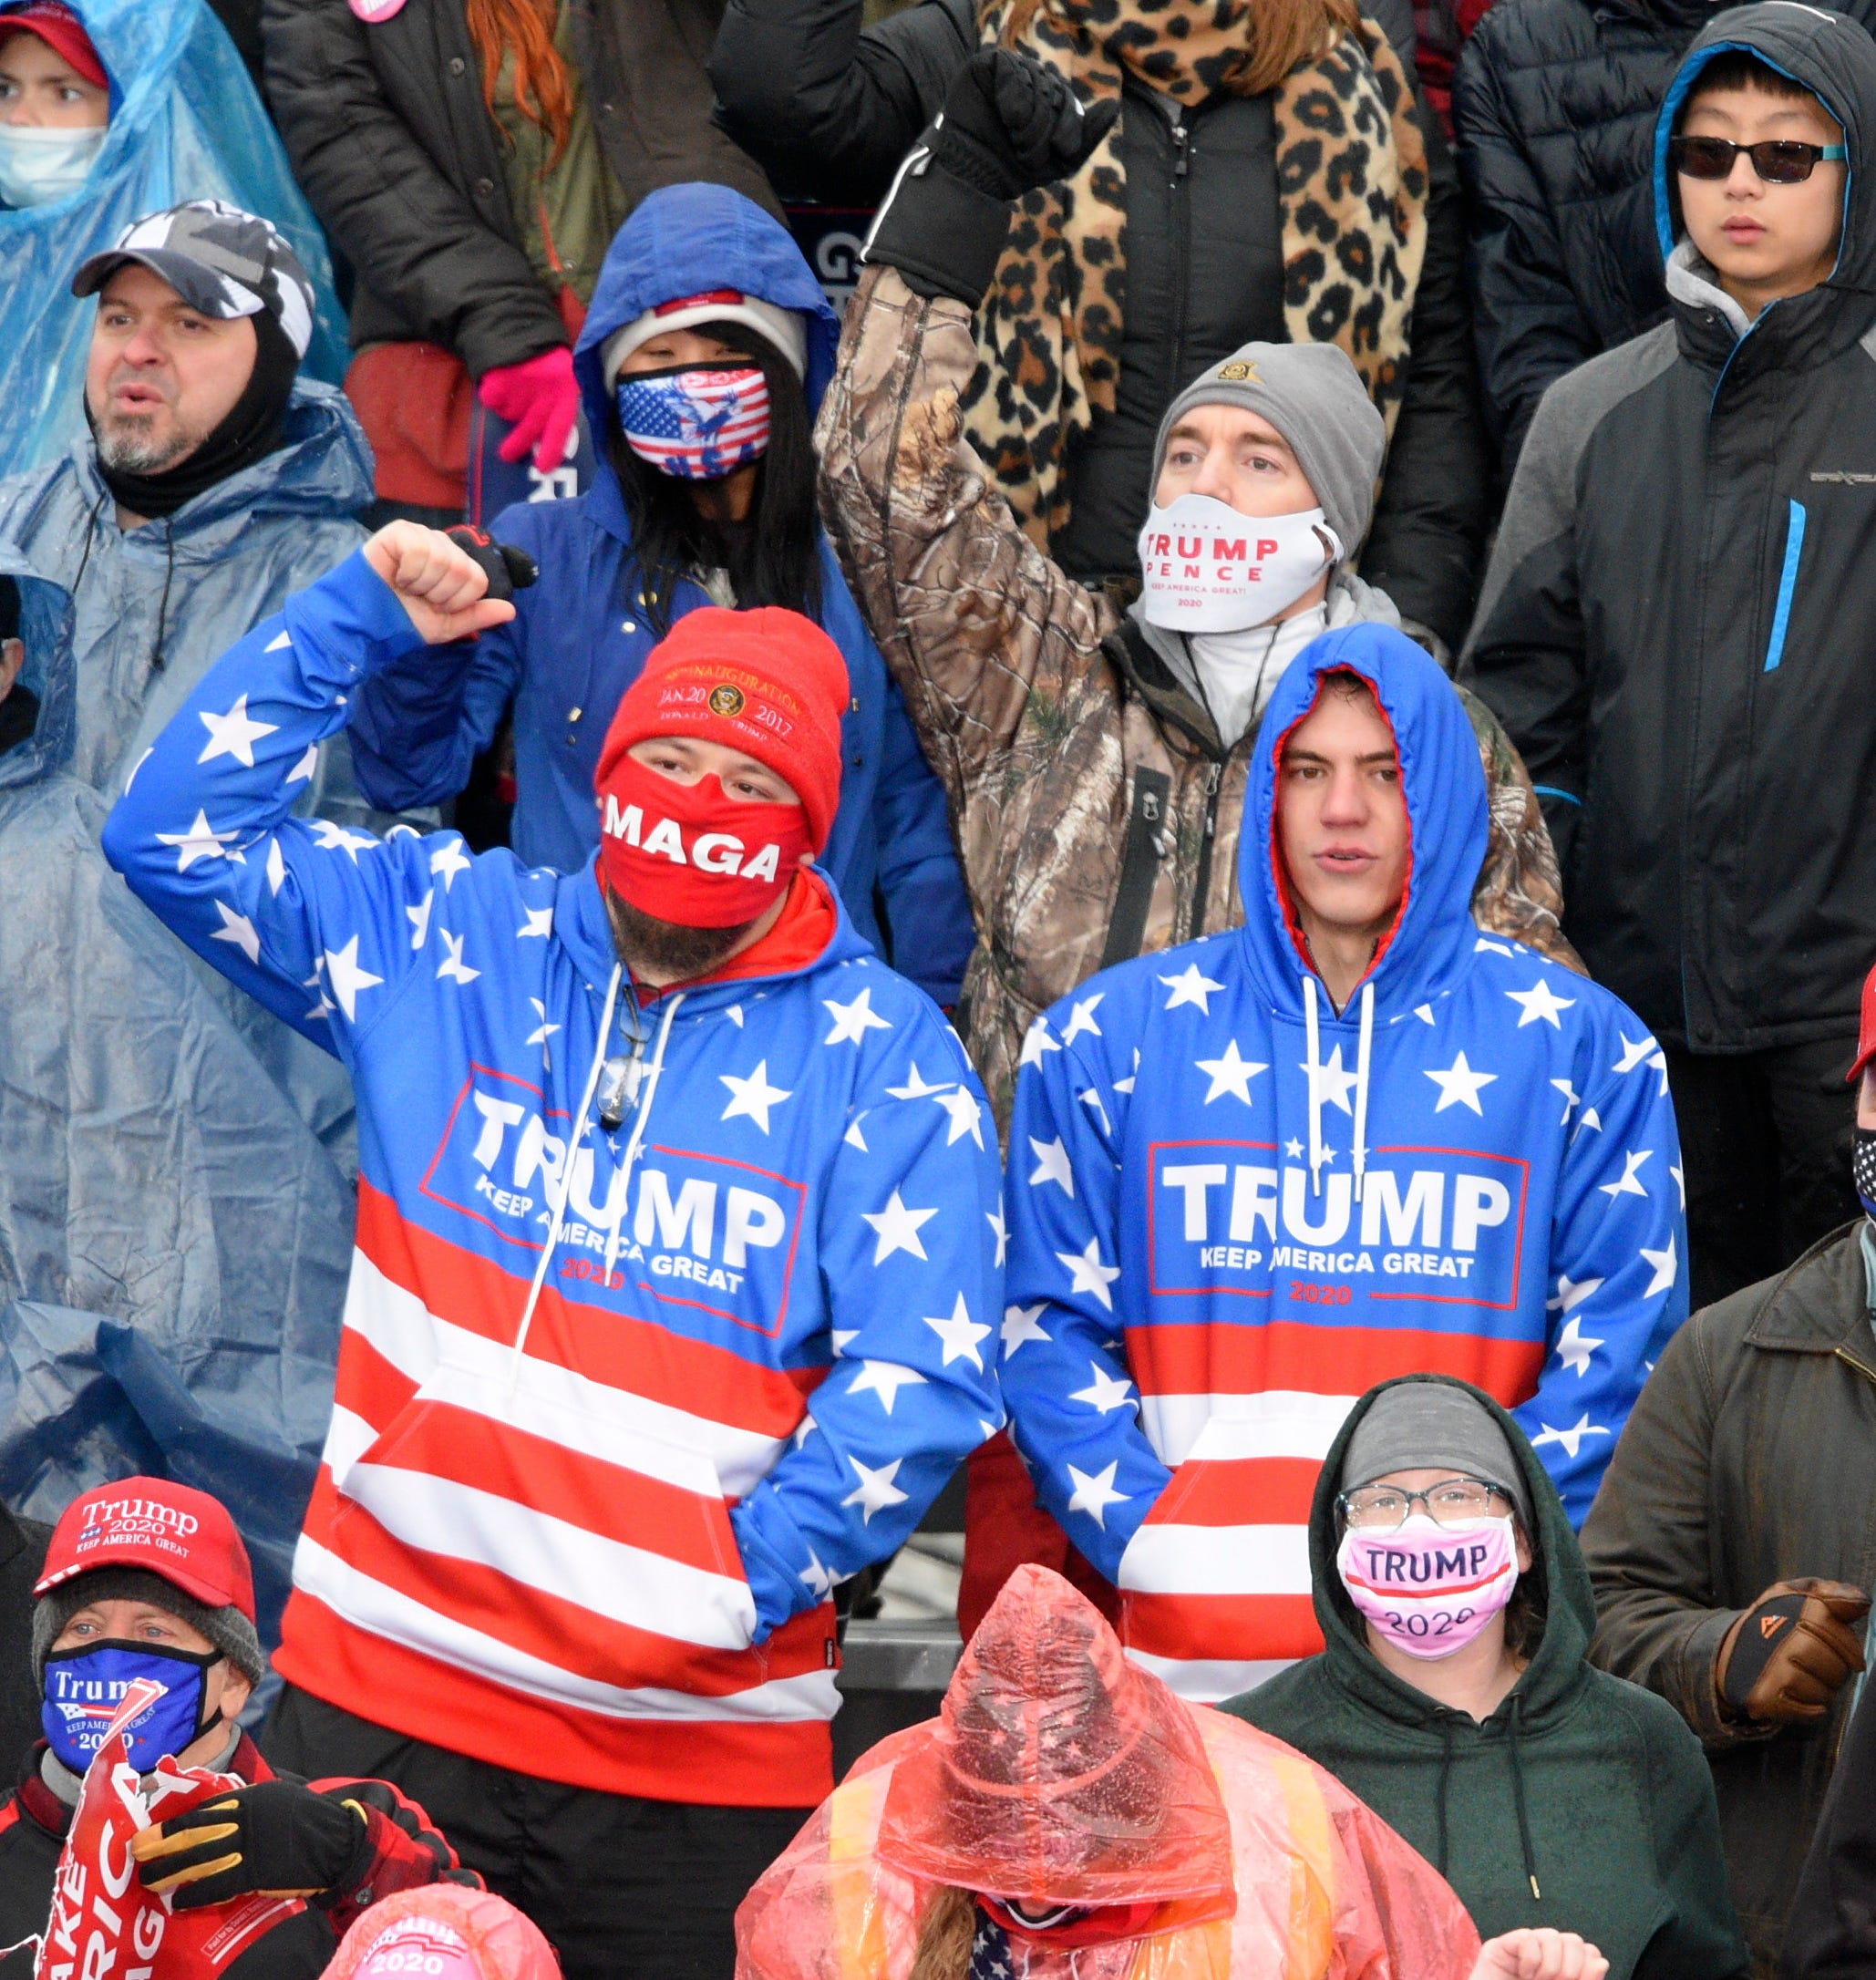 People wear matching Trump jackets as they wait for the President to arrive at a campaign rally in Lansing.